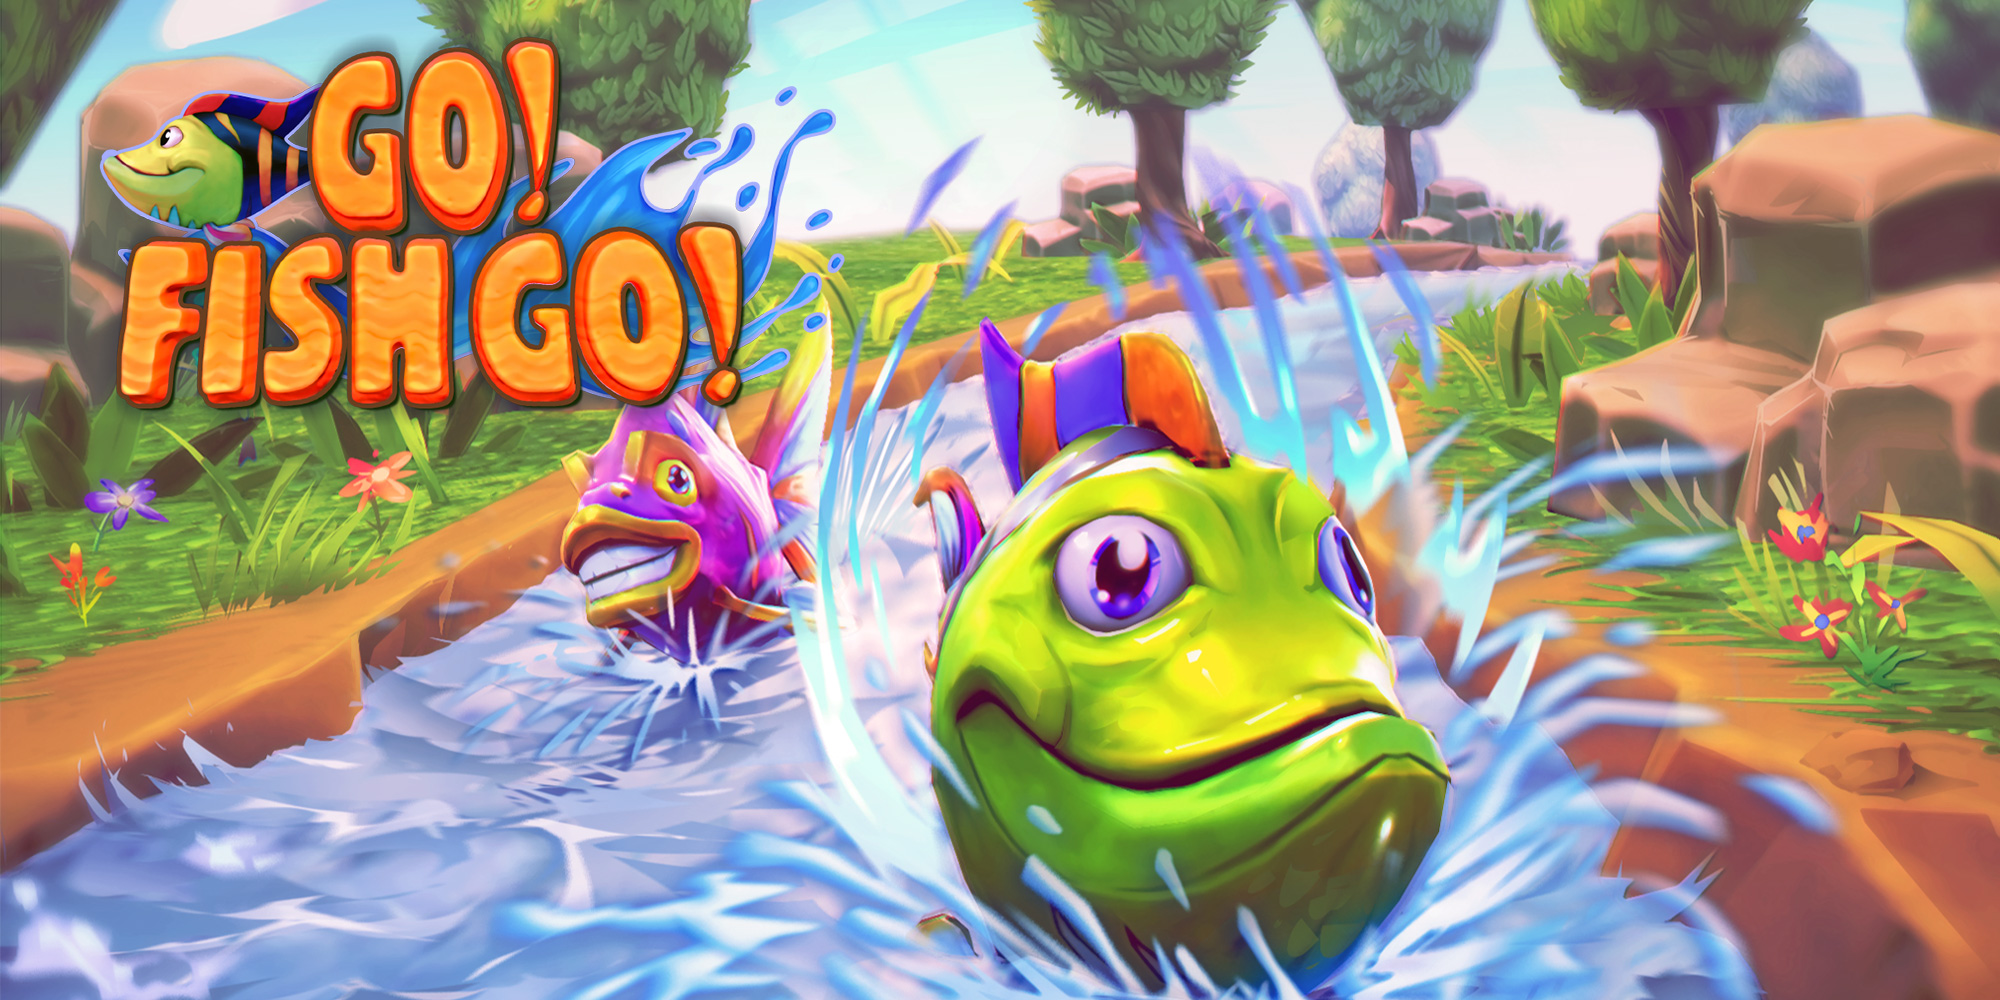 Go! Fish Go! Characters pack, DLC